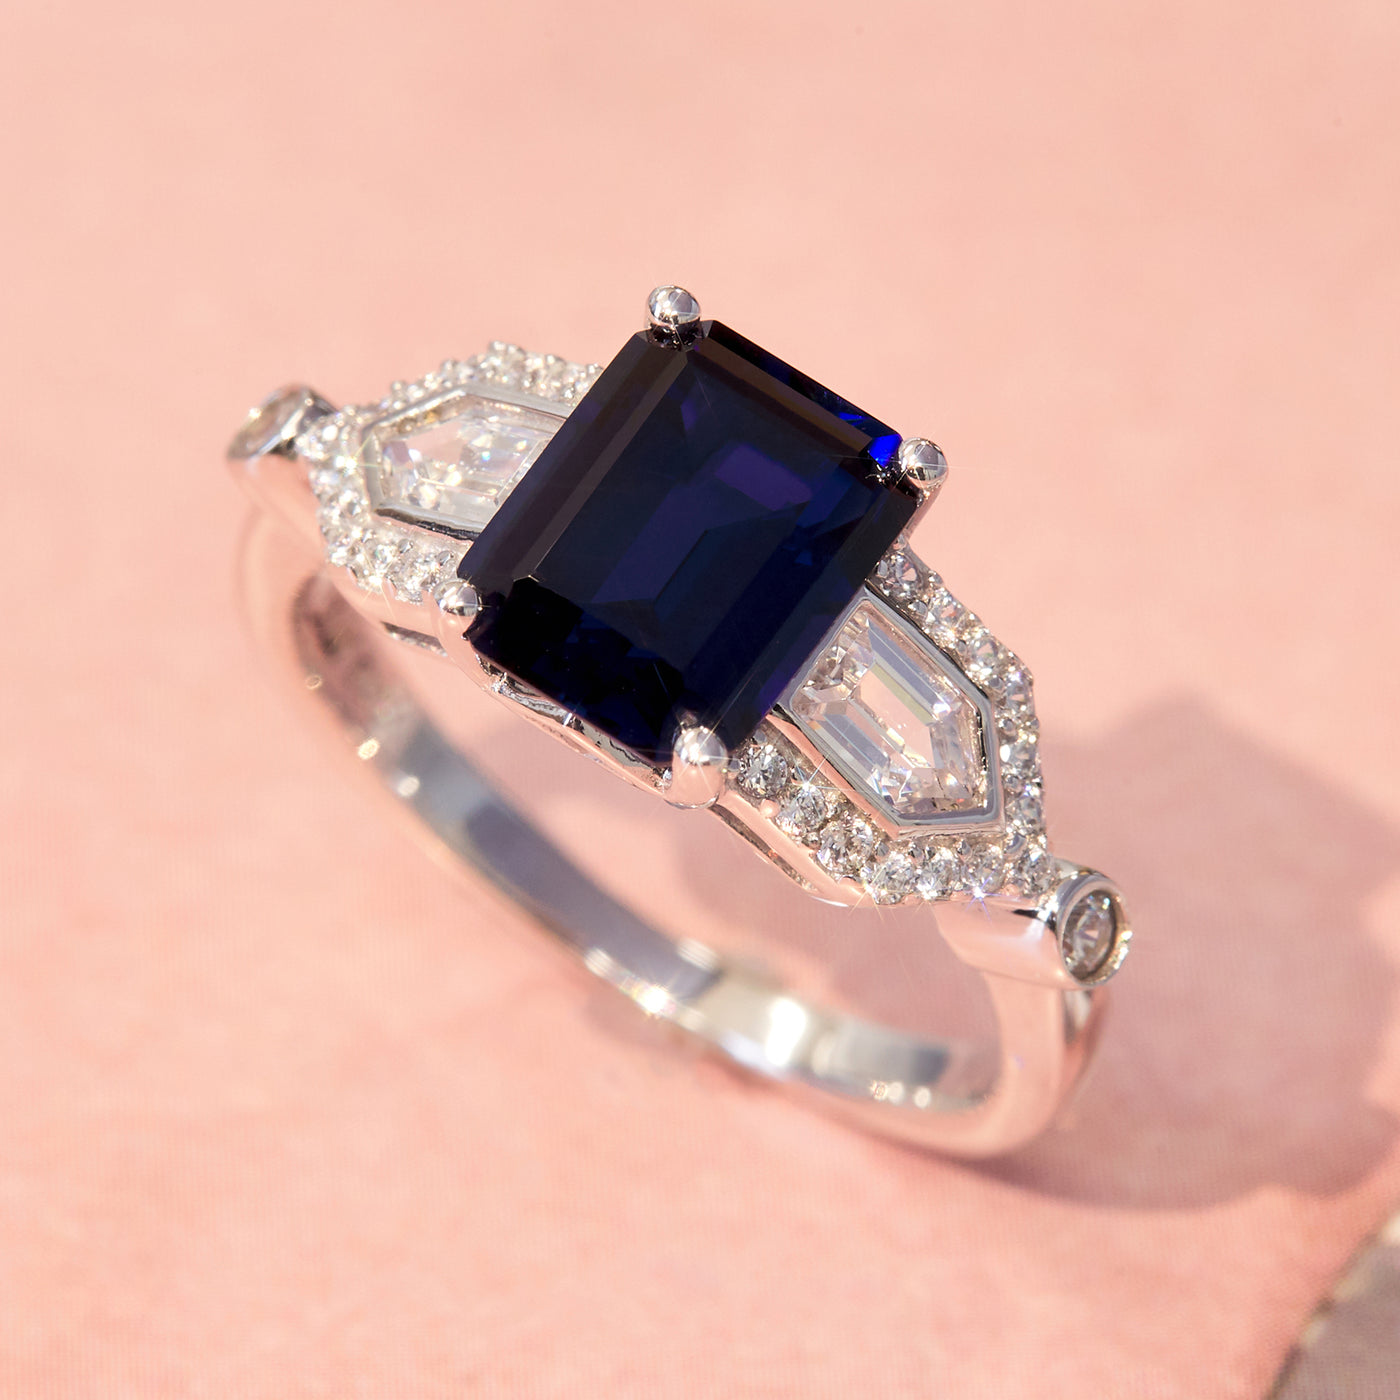 Emerald Cut 2.5 CT Simulated Blue Sapphire Ring, Platinum Plated Sterling Silver